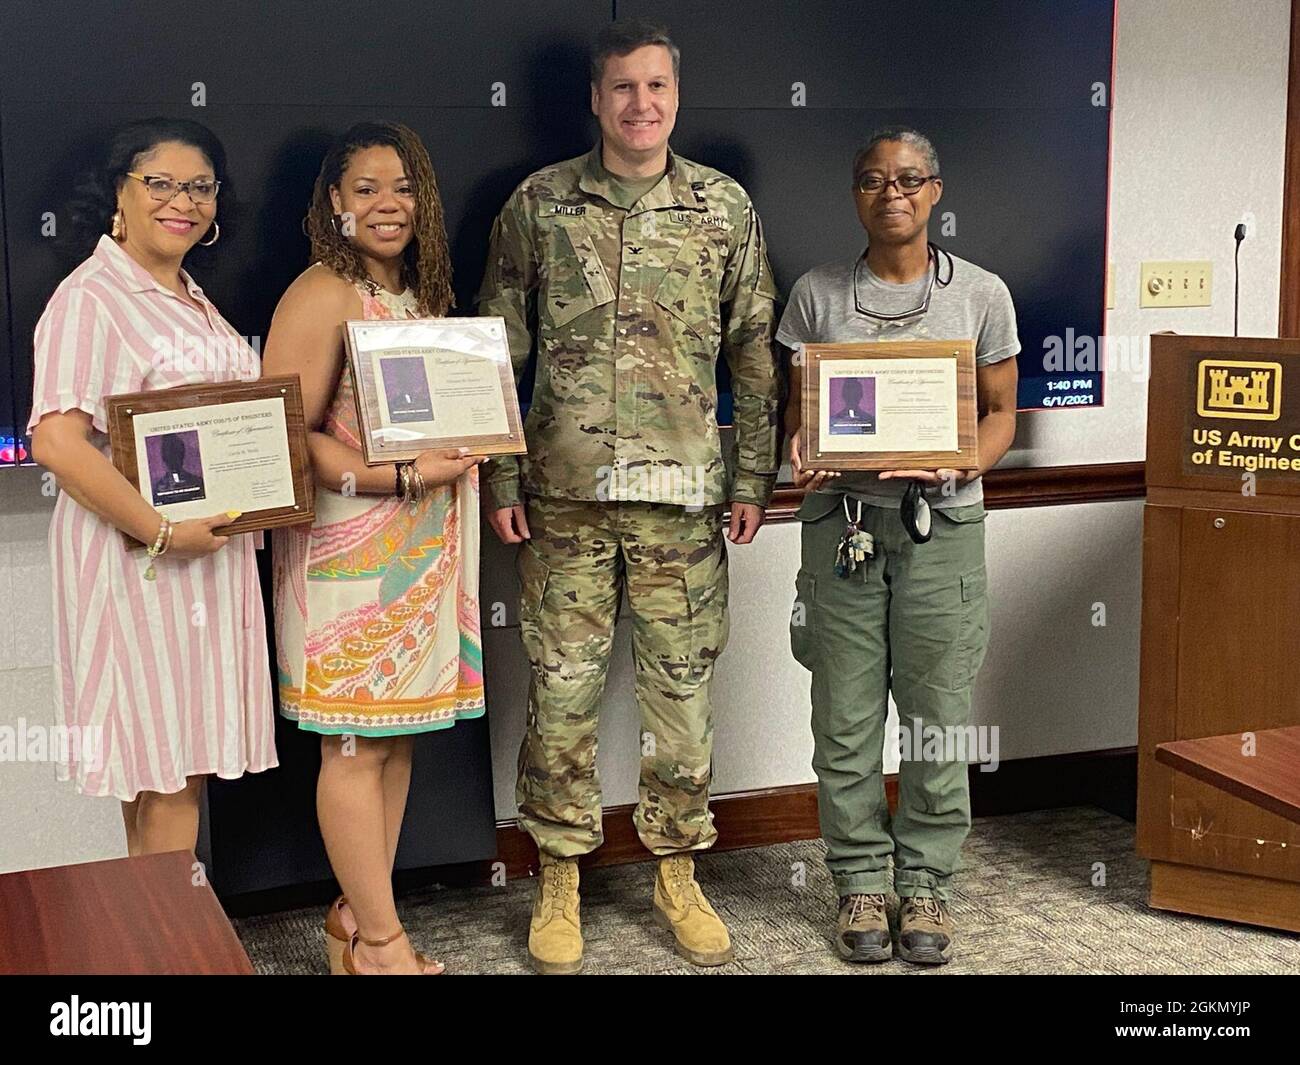 Memphis District Commander Col. Zachary Miller recognizes three district employees, Jun. 1, 2021, for their efforts planning, coordinating, and facilitating the district’s comprehensive Women’s History Month Roundtable Discussion. Pictured left to right are Carla R. Wells, TiJuana Harris, Col. Zachary Miller, and Erica D. Thomas. Also contributing to the event but not pictured are Suzy G. Weil, Kandi H. Waller, Courtney A. Emmerich, and Angela Freyermuth. Stock Photo